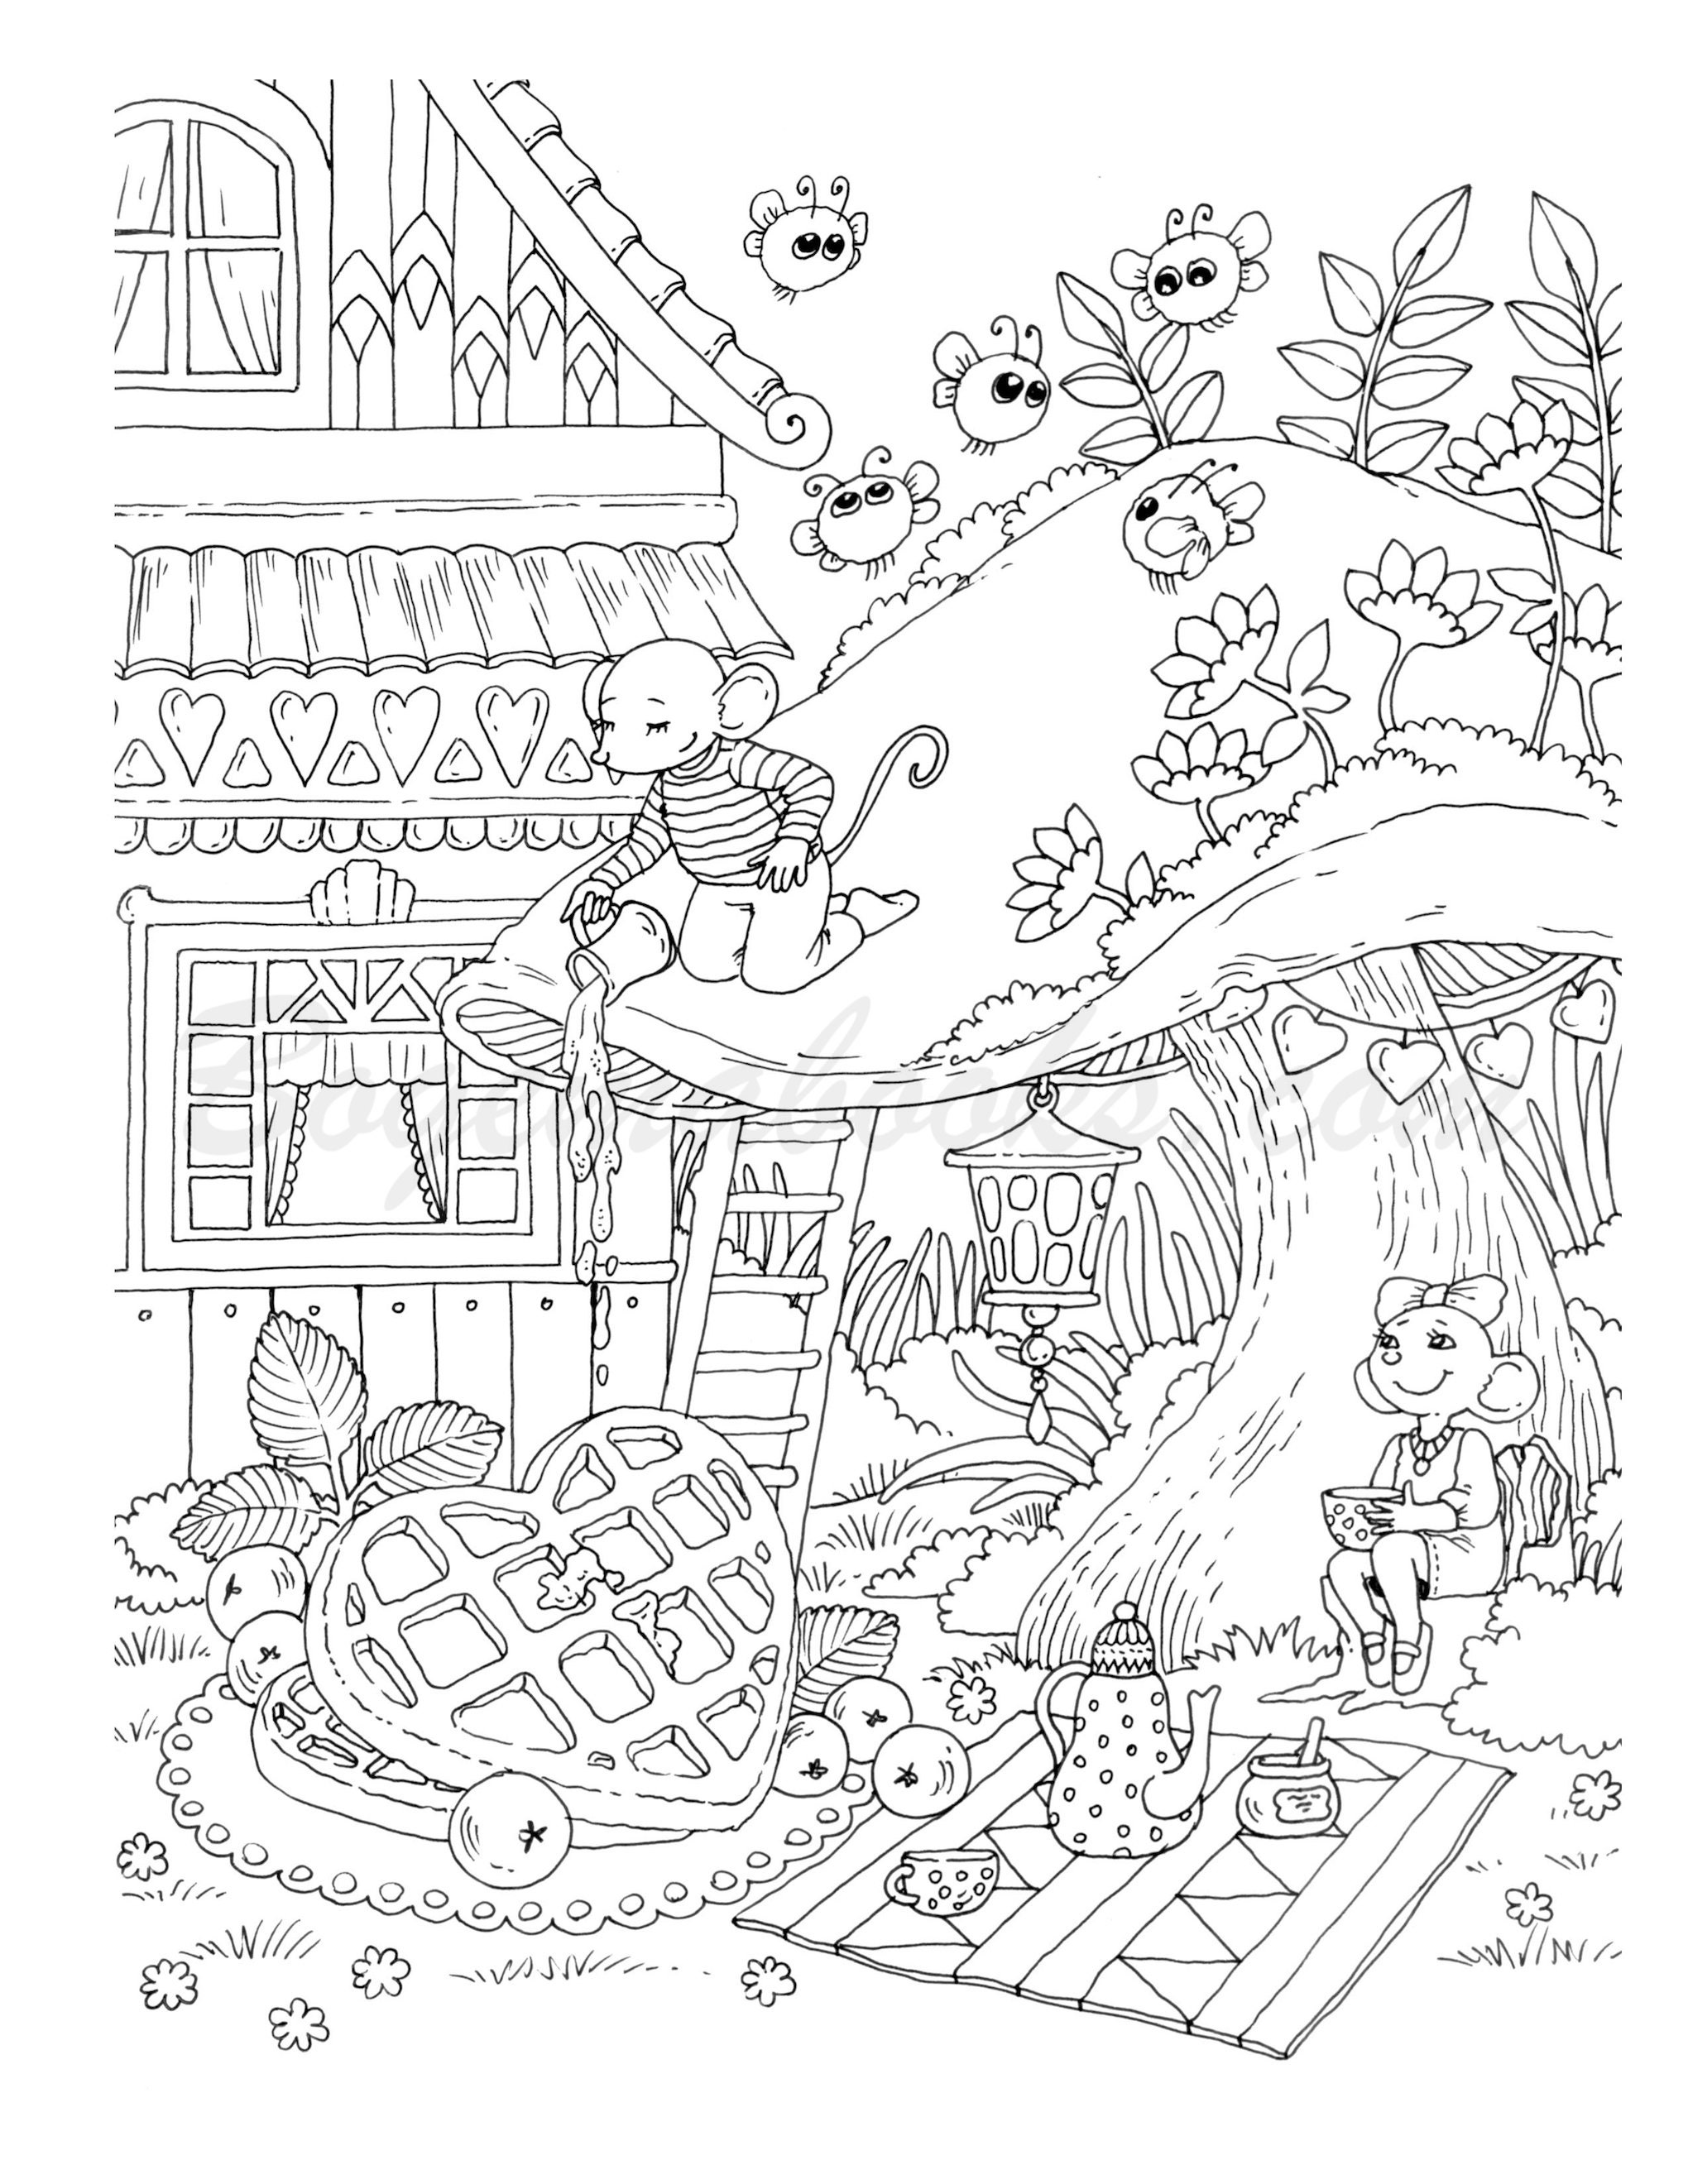 Great Lions adult Coloring Books, Digital Coloring Pages, Coloring